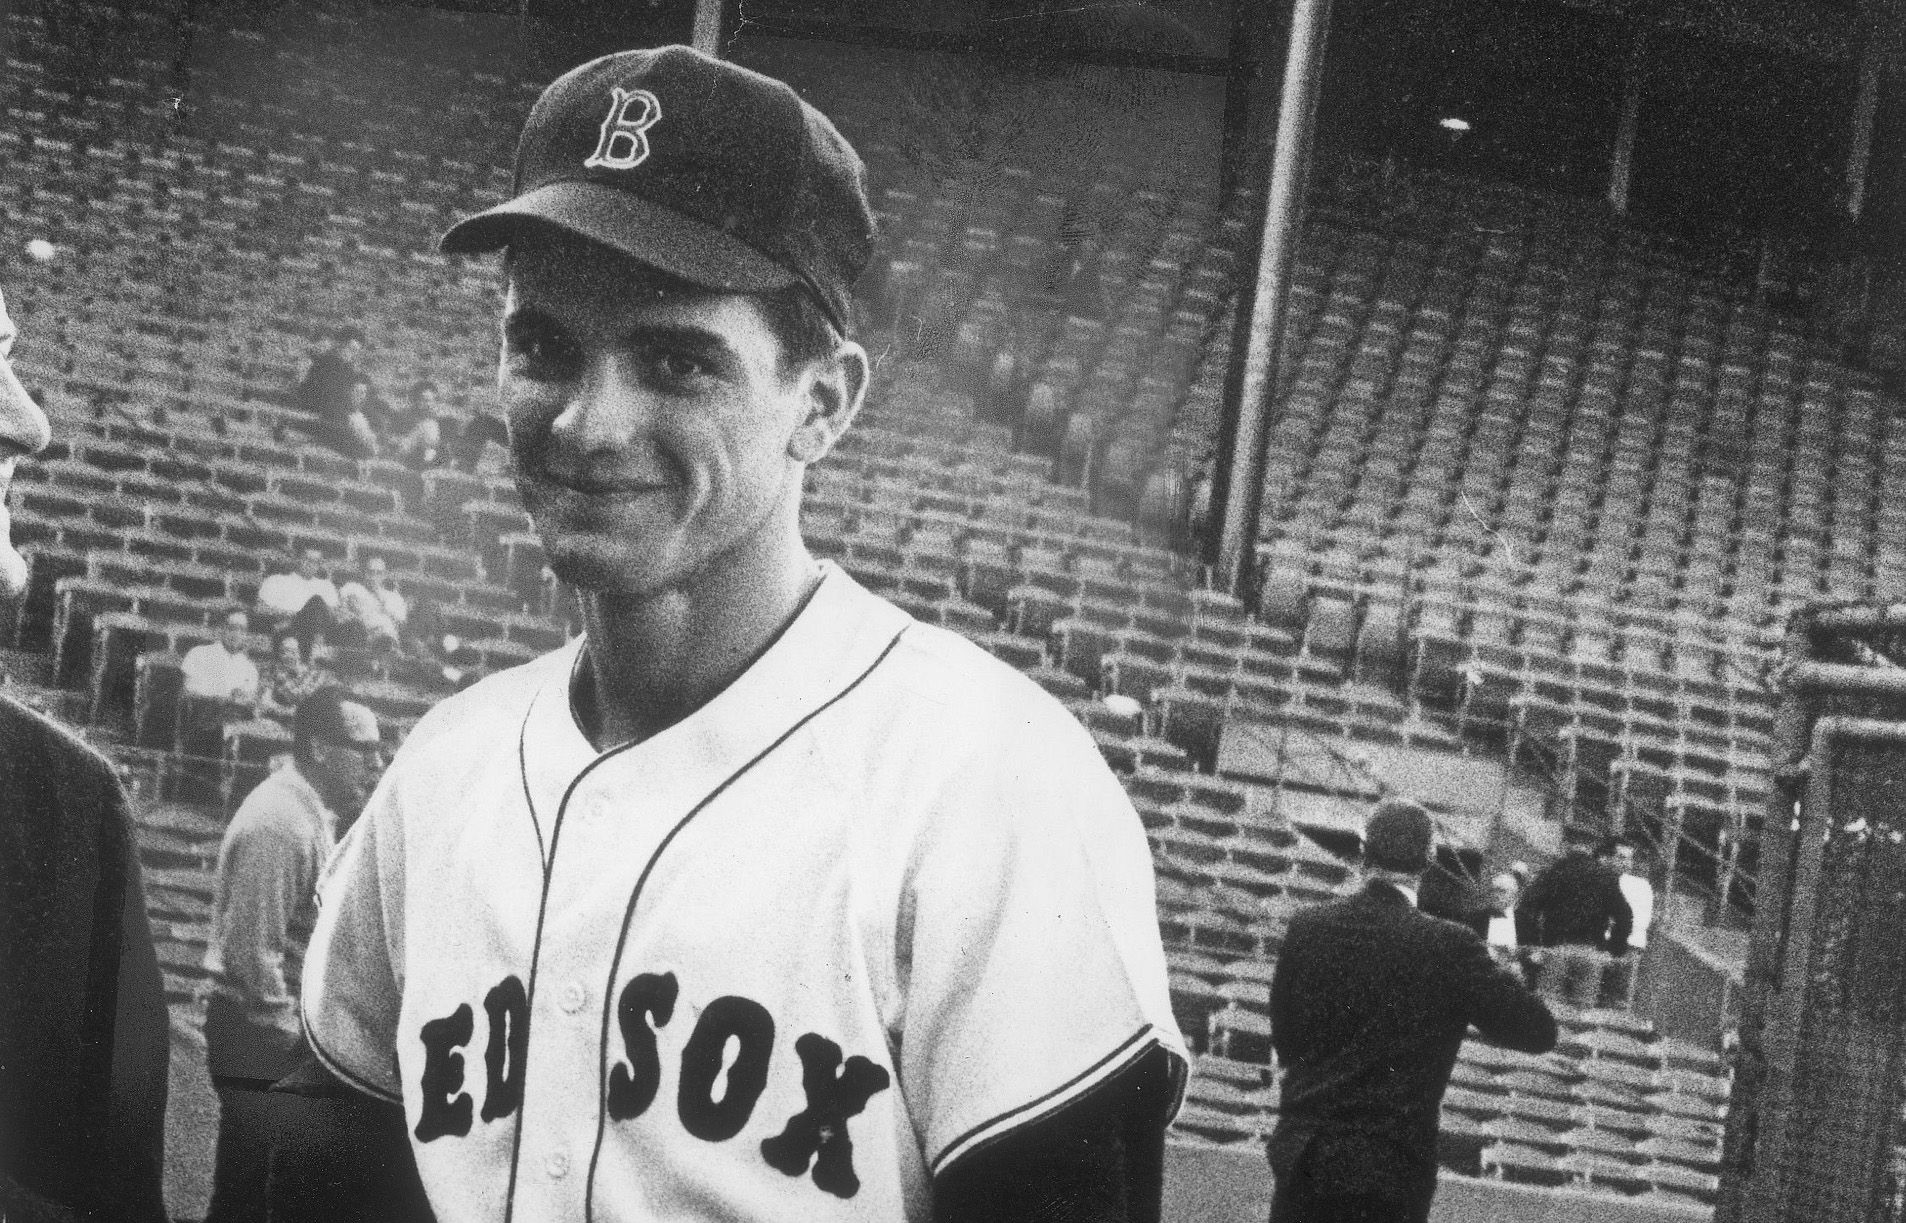 Red Sox legend Tony C to be honored with documentary - The Boston